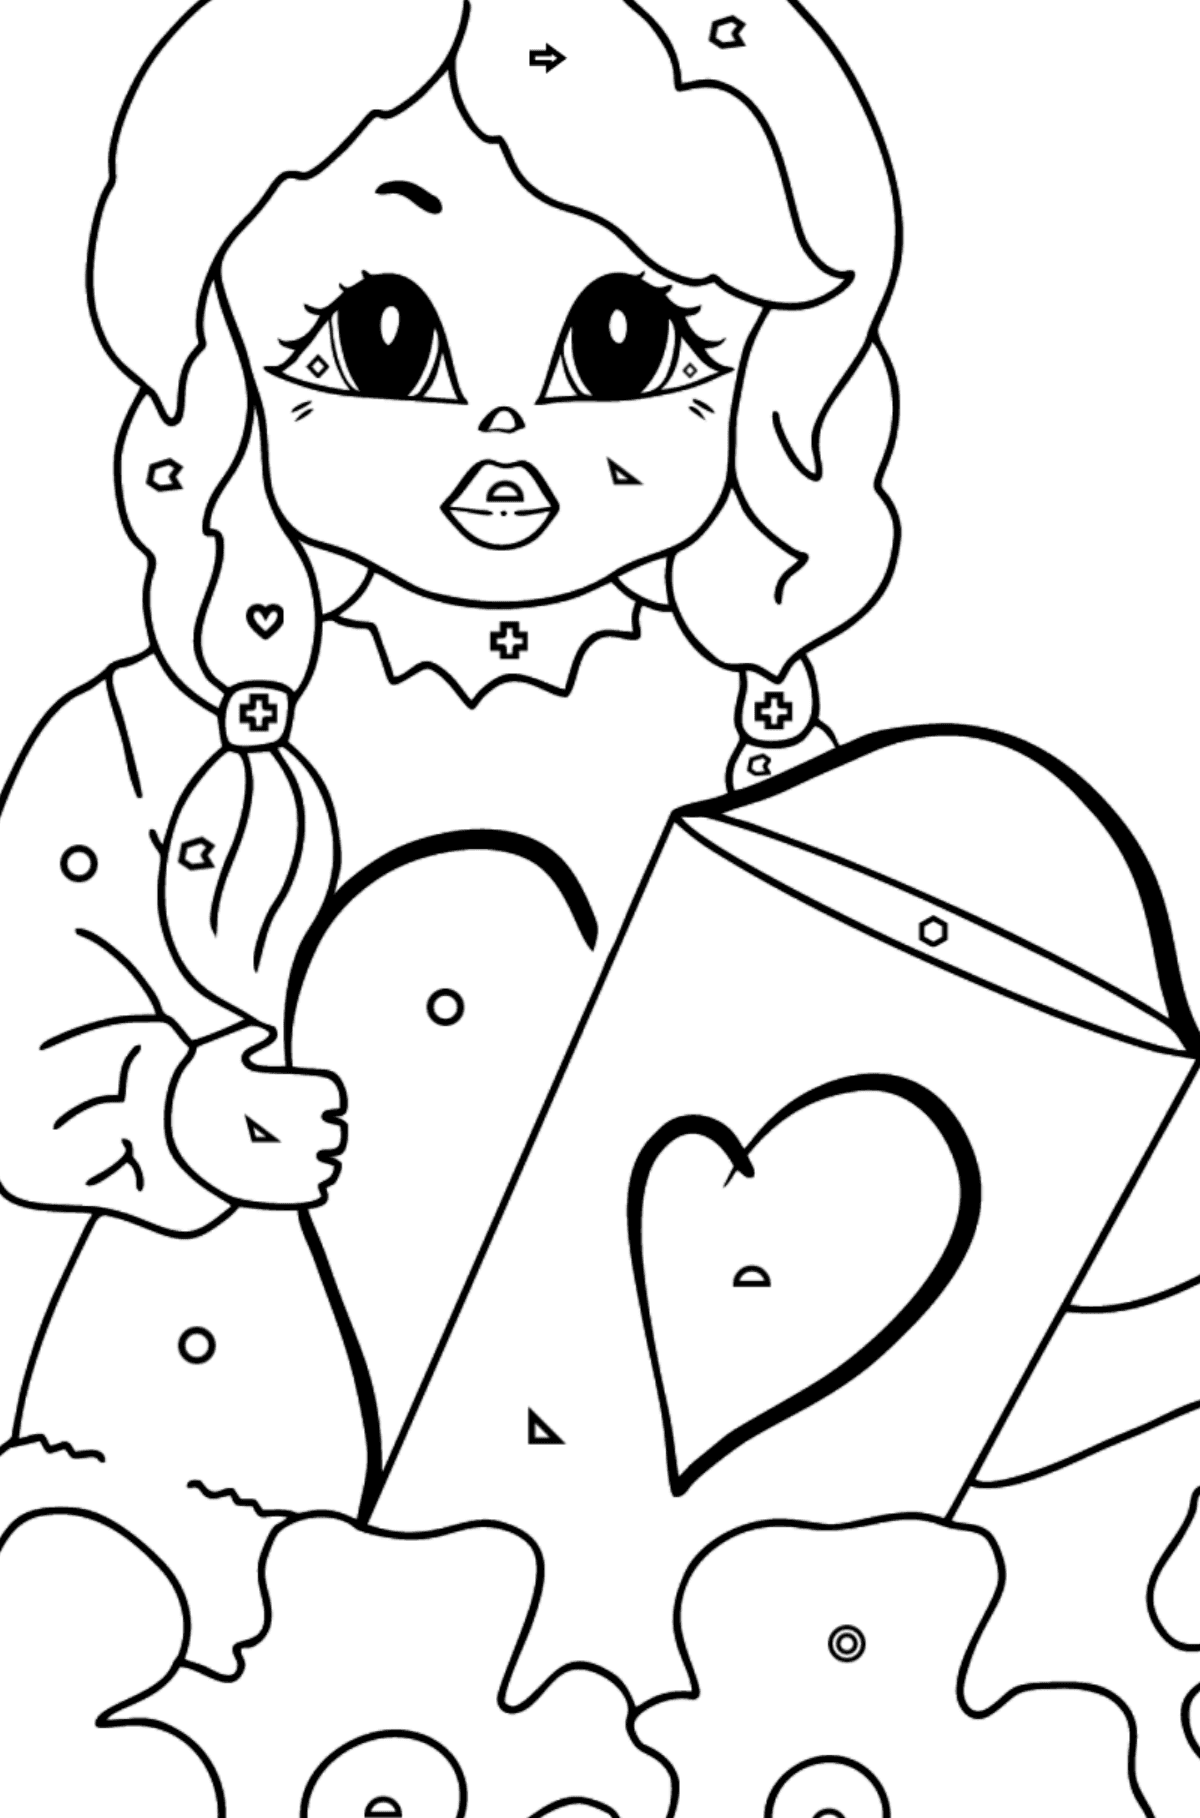 Coloring Page - A Princess with a Watering Can - Coloring by Geometric Shapes for Kids